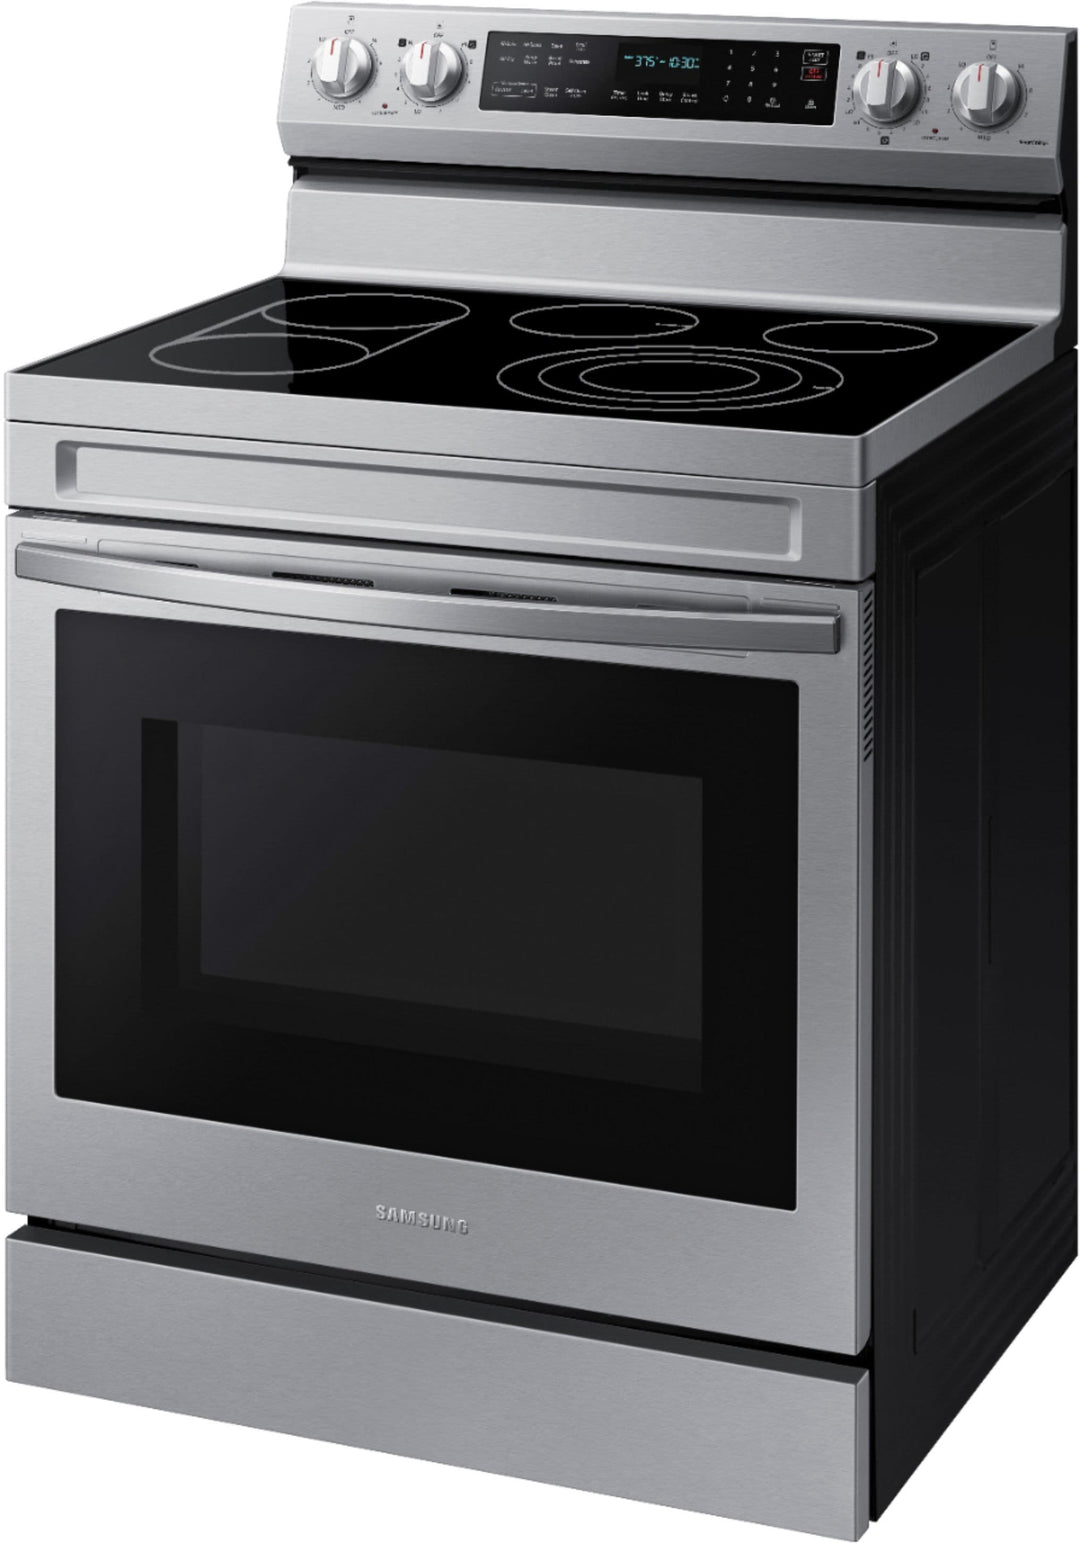 Samsung - 6.3 cu. ft. Freestanding Electric Convection+ Range with WiFi, No-Preheat Air Fry and Griddle - Stainless steel_4